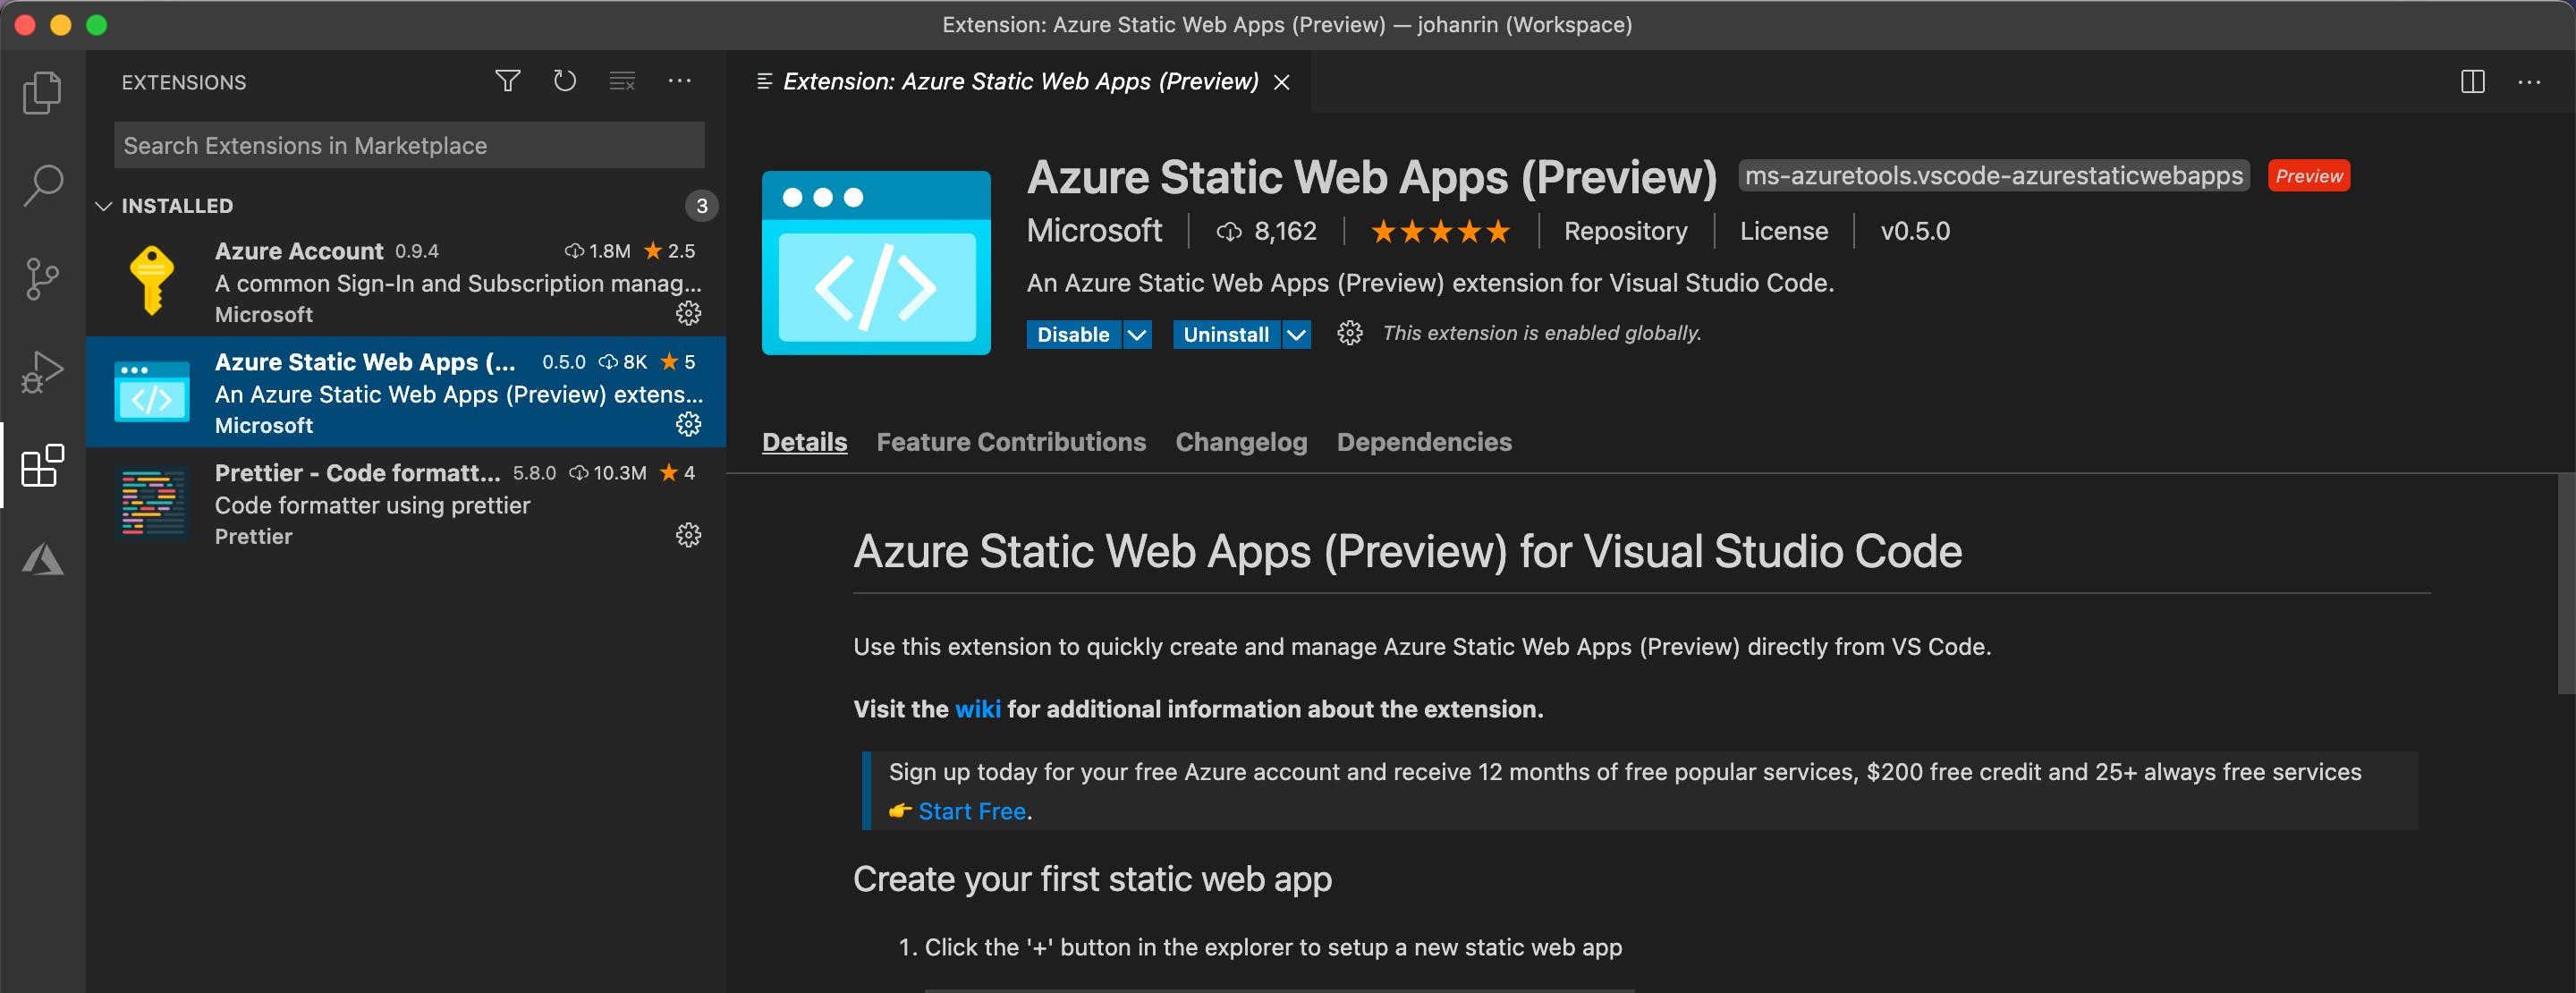 Azure Static Web Apps extension